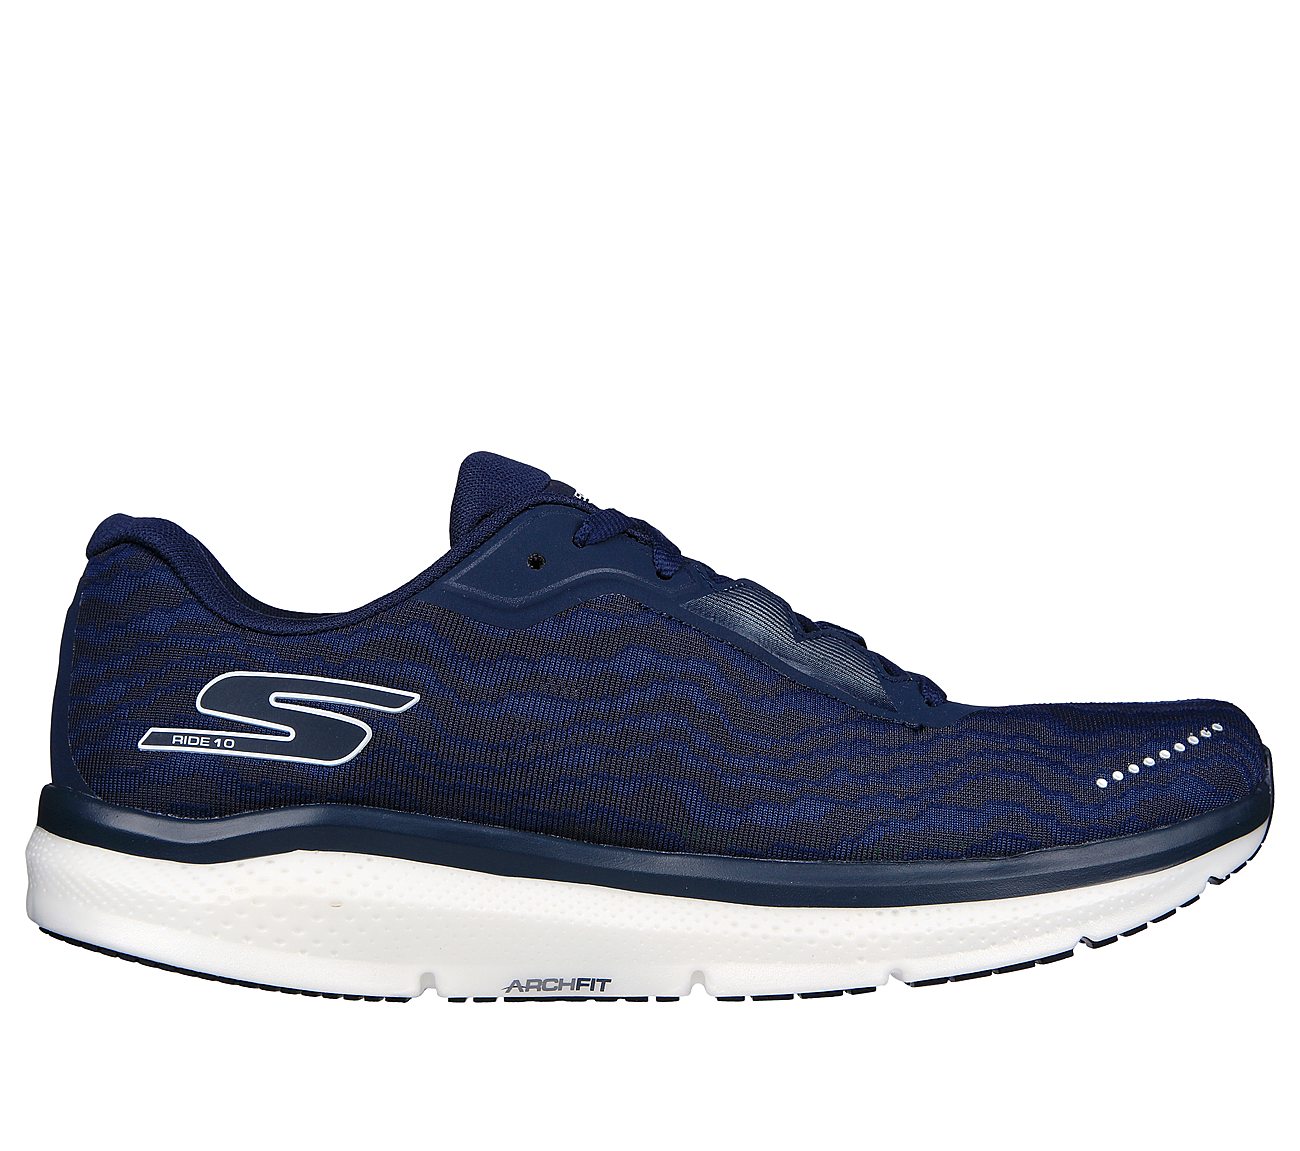 GO RUN RIDE 10, NAVY/WHITE Footwear Lateral View